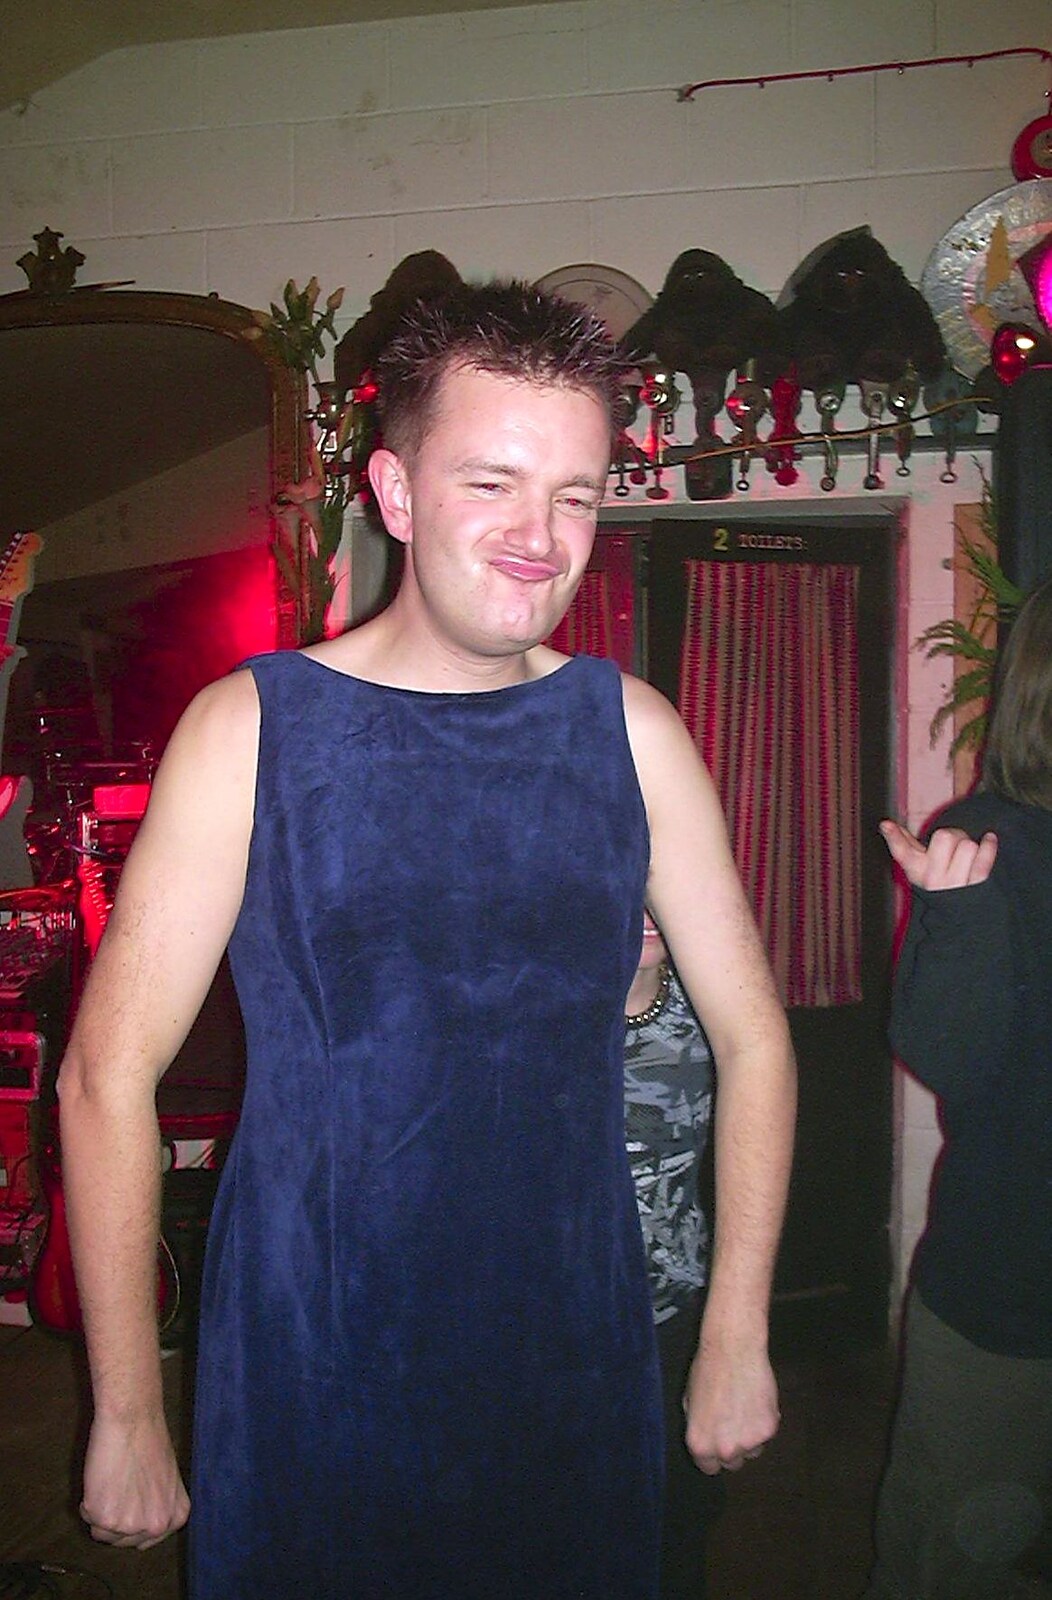 Nosher in a dress from The BBs do New Year's Eve at The Cider Shed, Banham, Norfolk - 31st December 2003